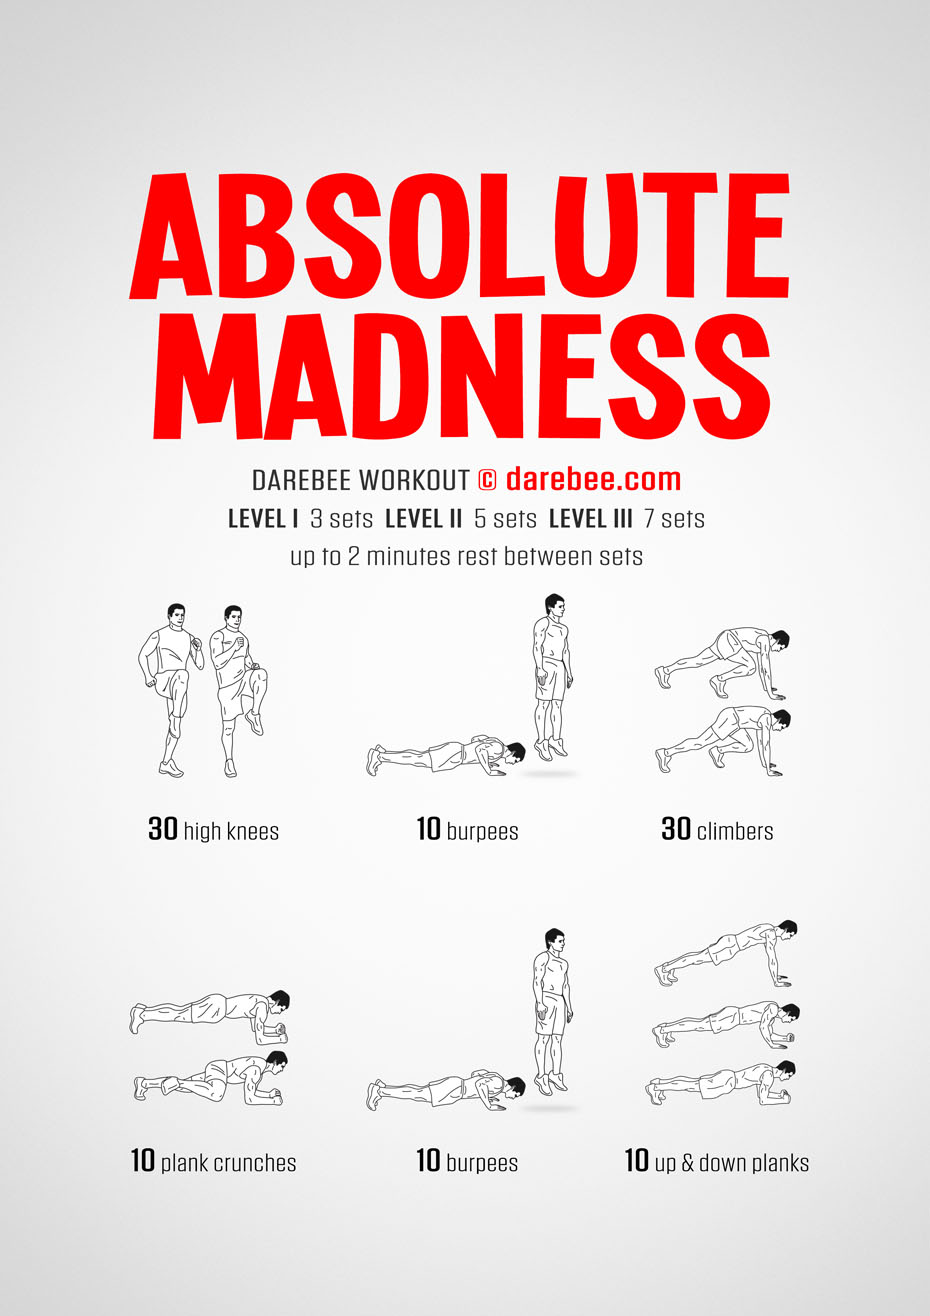 Absolute Madness is a Darebee home fitness strength workout